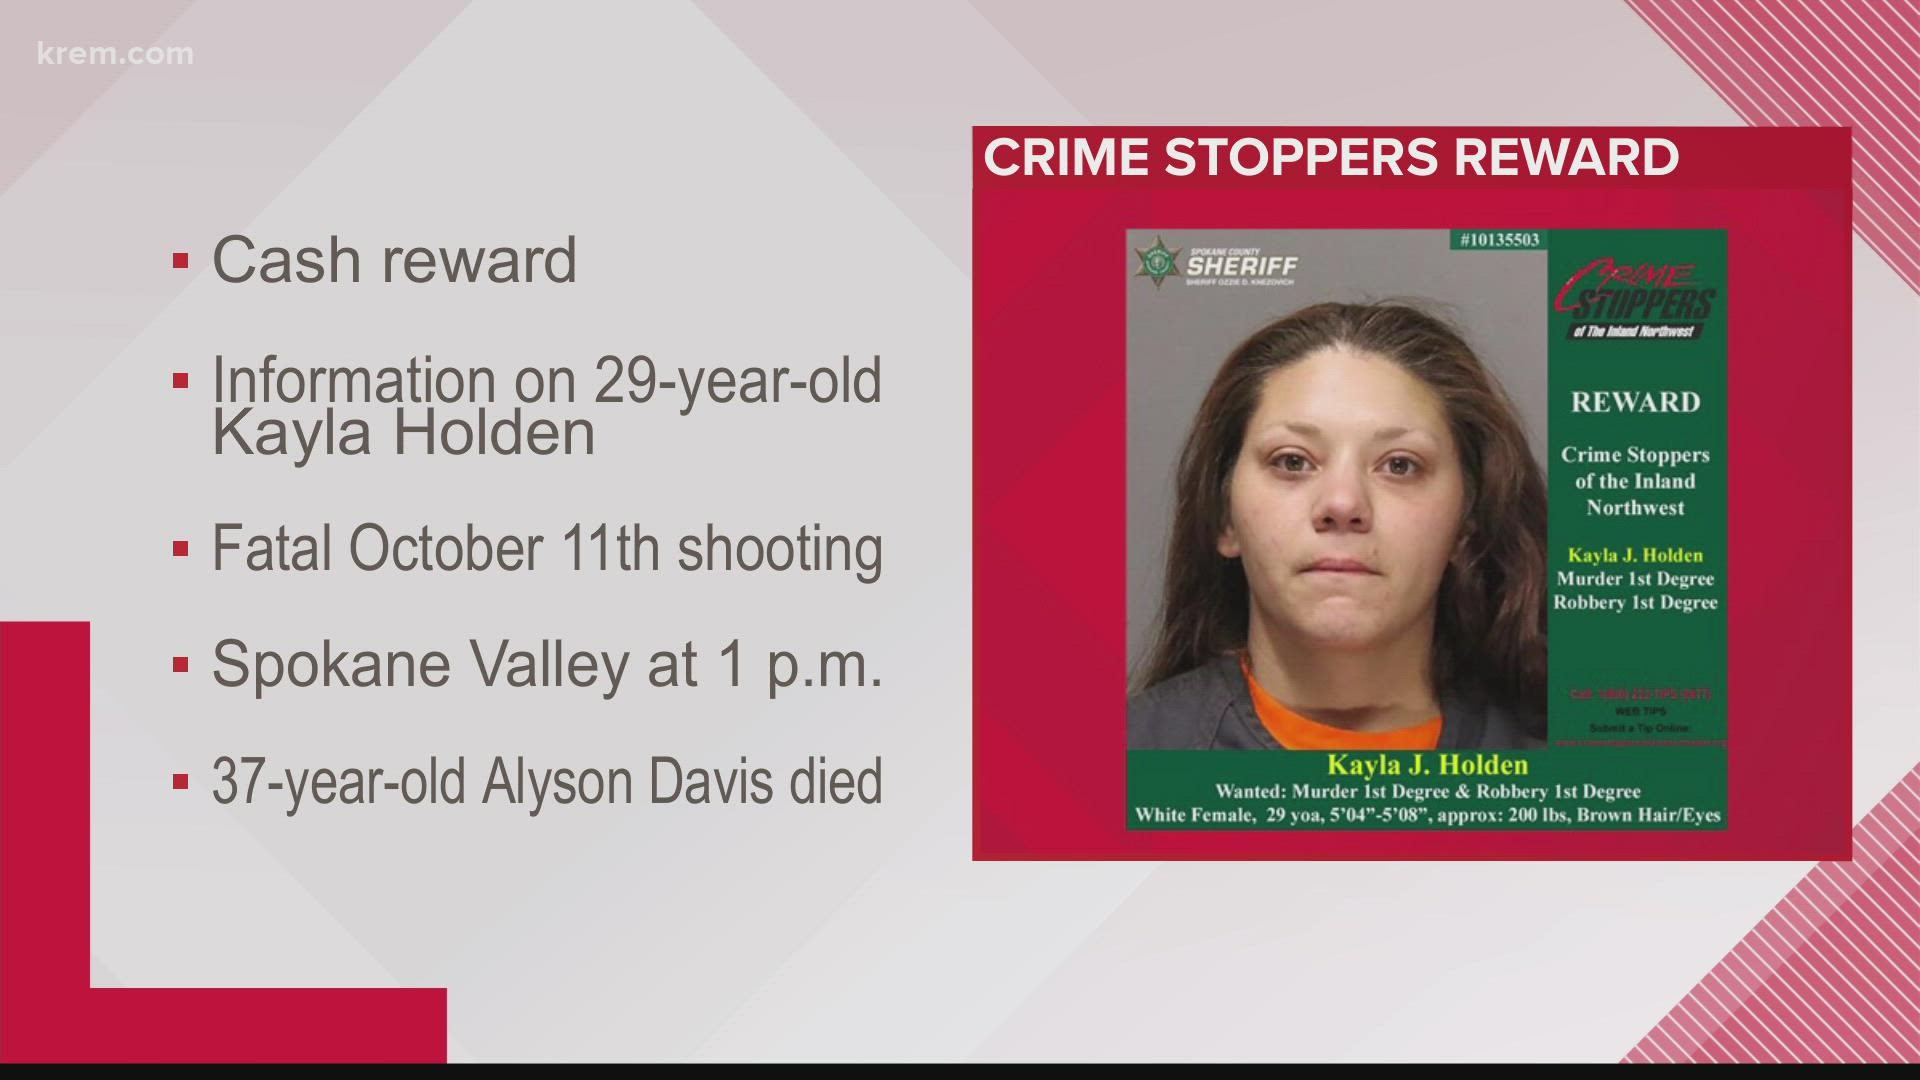 Crime Stoppers of the Inland Northwest needs information to find suspect Kayla J. Holden, as police now have probable cause to arrest her for the Oct. 11 shooting.